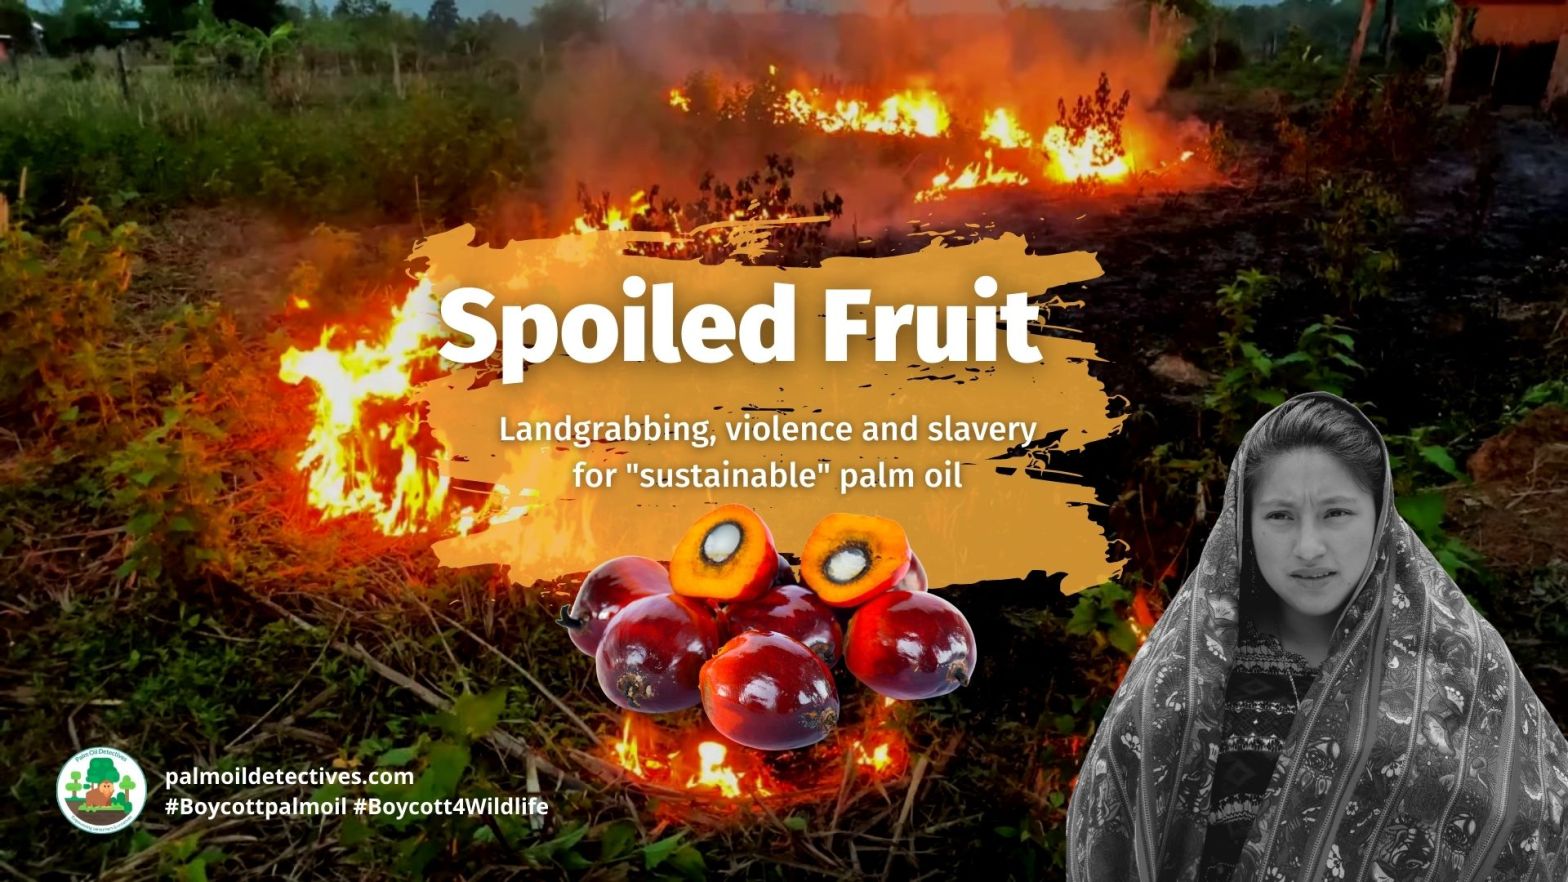 Spoiled Fruit: landgrabbing, violence and slavery for "sustainable" palm oil